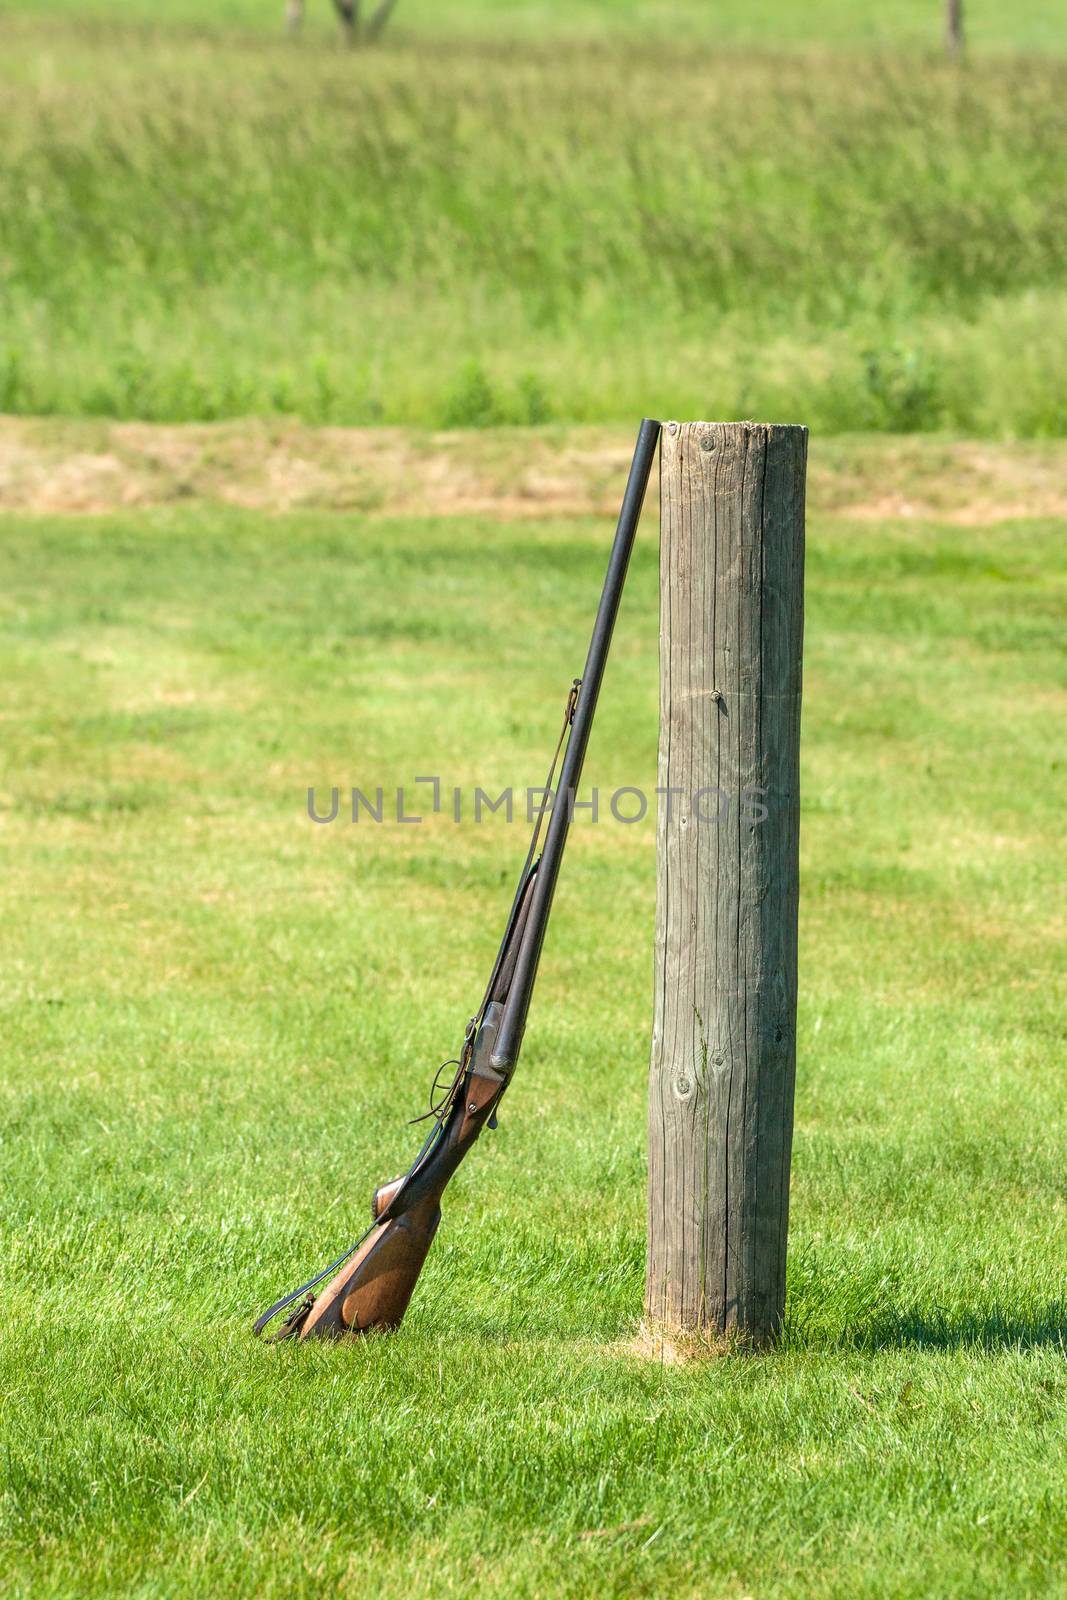 Rifle standing against a wooden pole on a green meadow